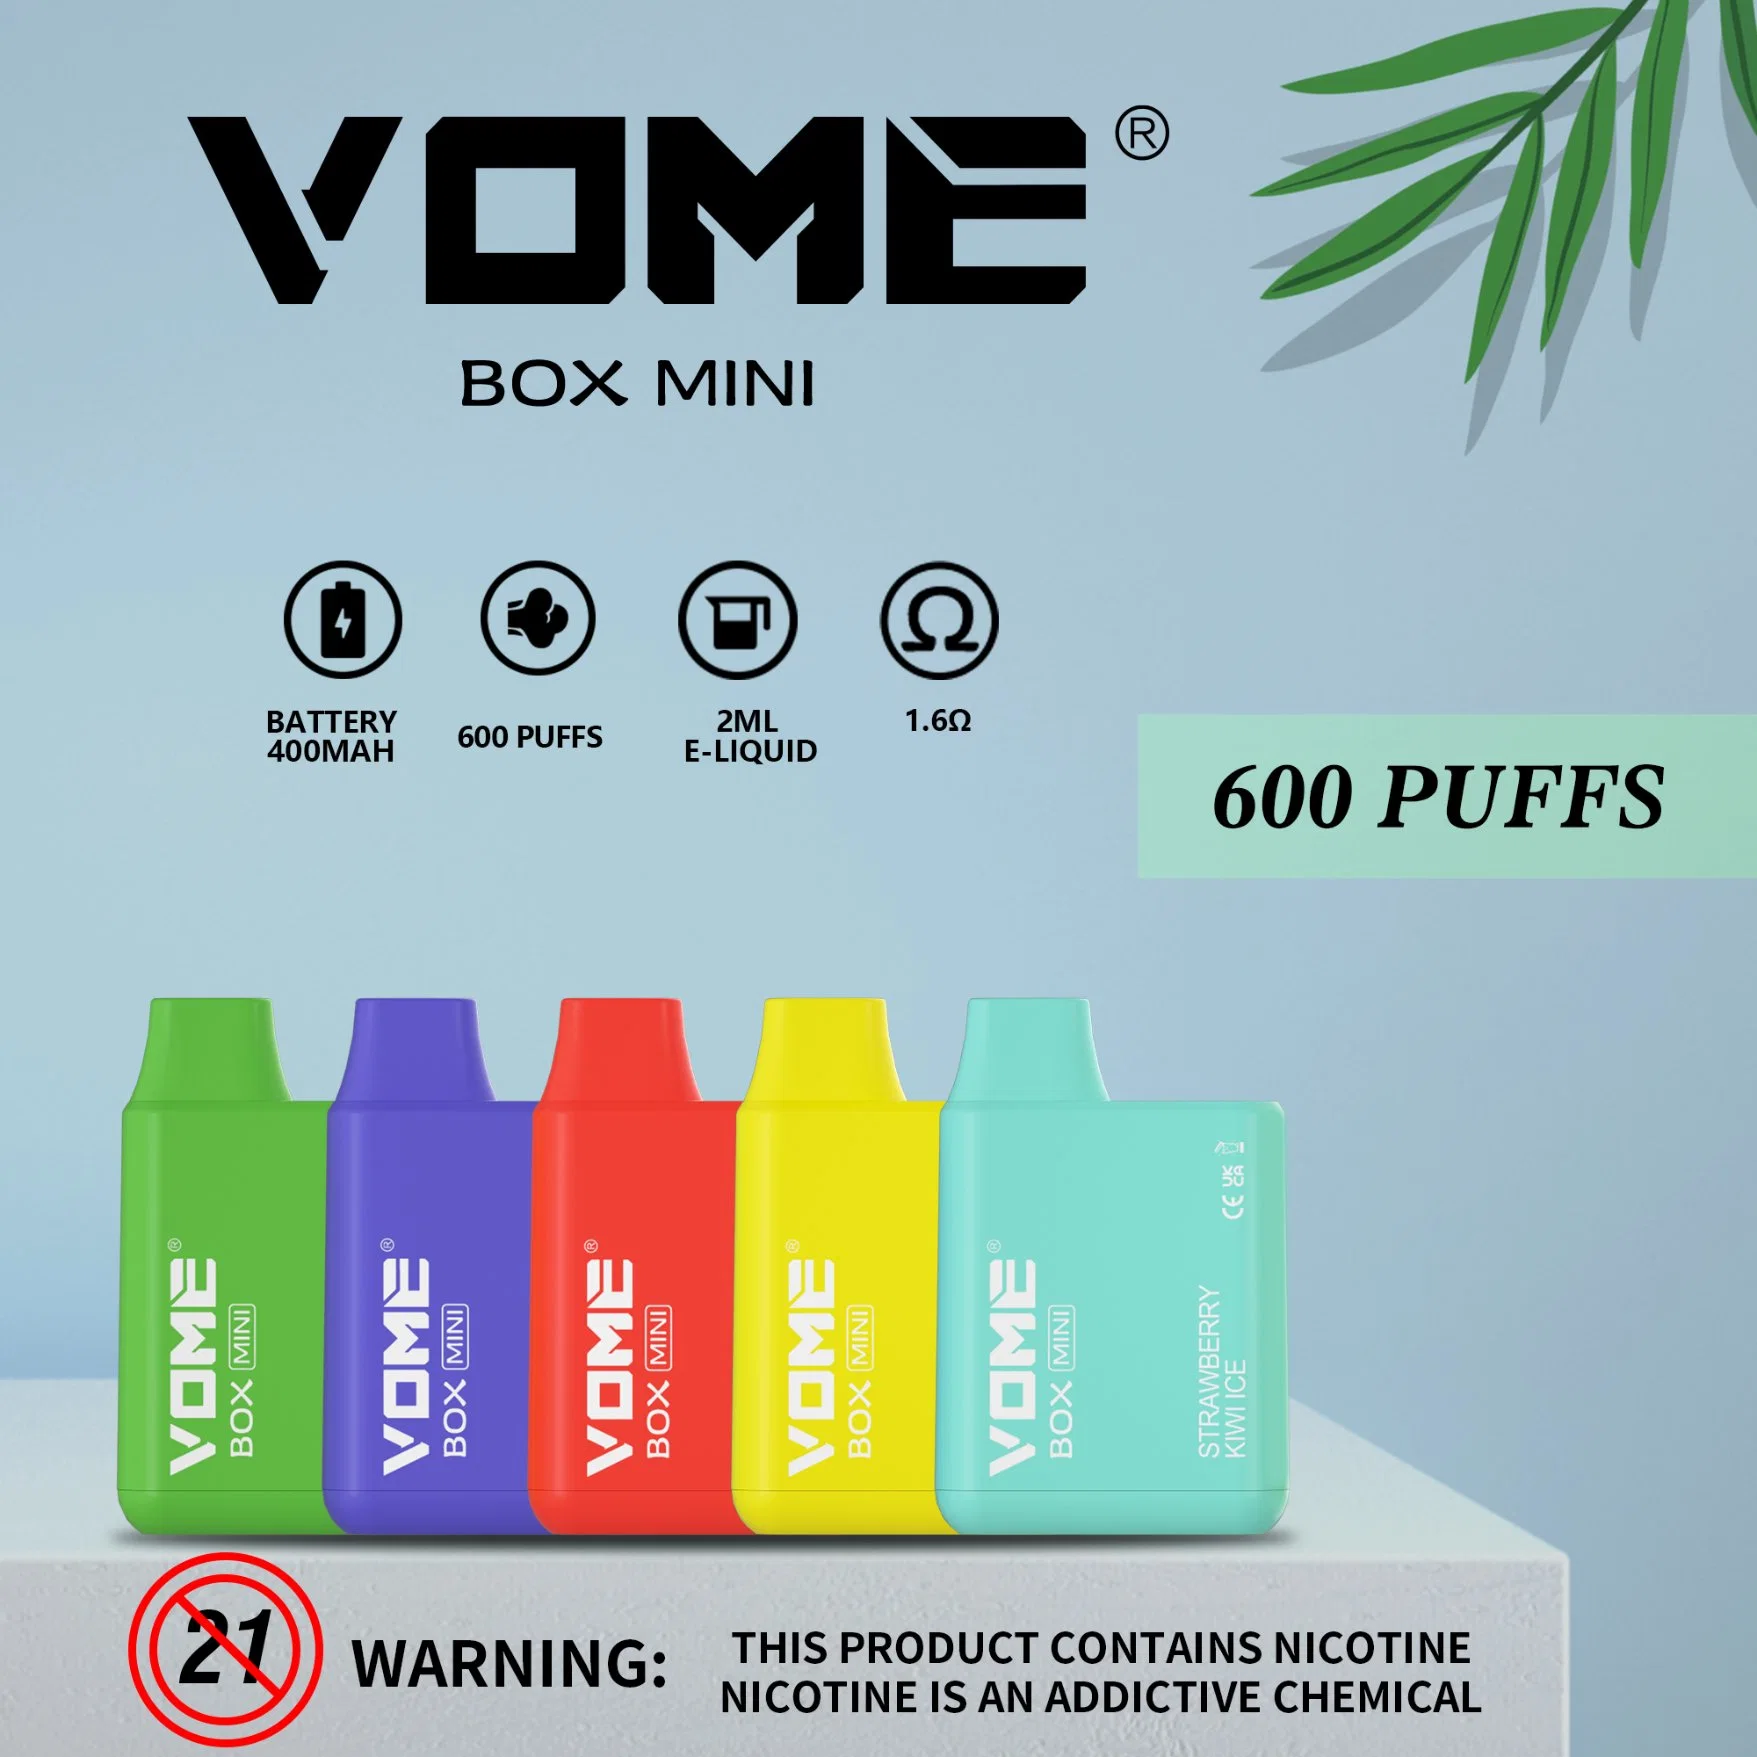 Highly Recommendation Disposable/Chargeable Vape 400mAh Vome Box Mini 600 Puffs